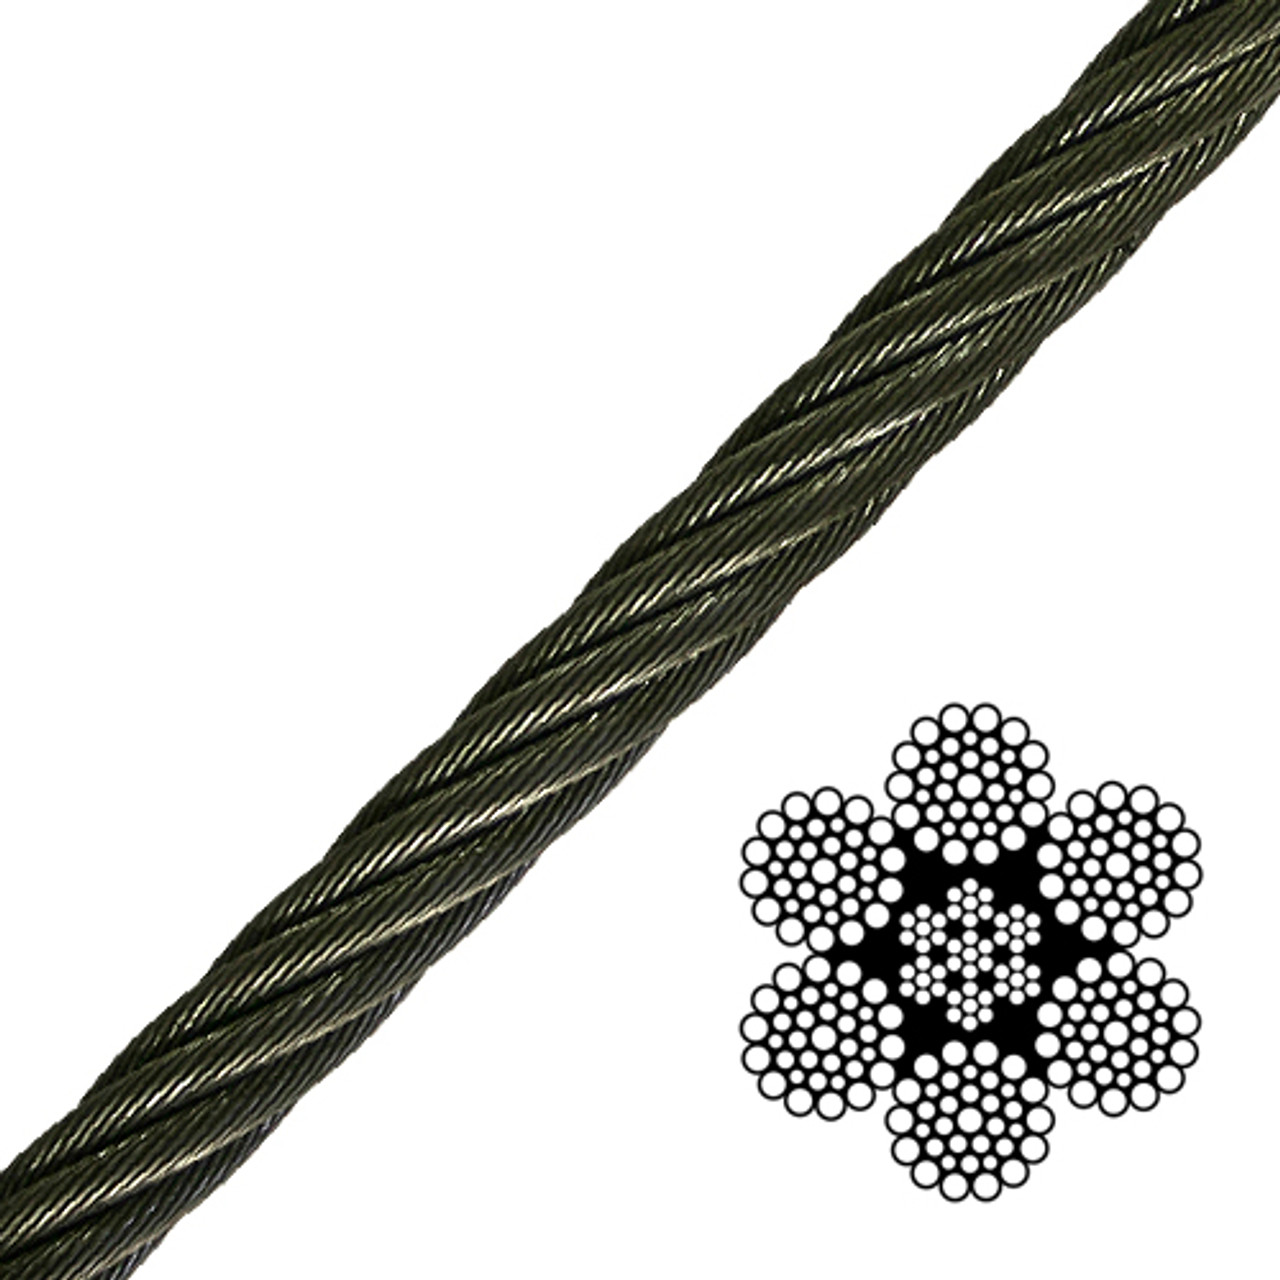 Stainless Steel Wire Rope 7 X 7, 7 X 19, 1 X 19, 6 X 12, 6 X 19, 6